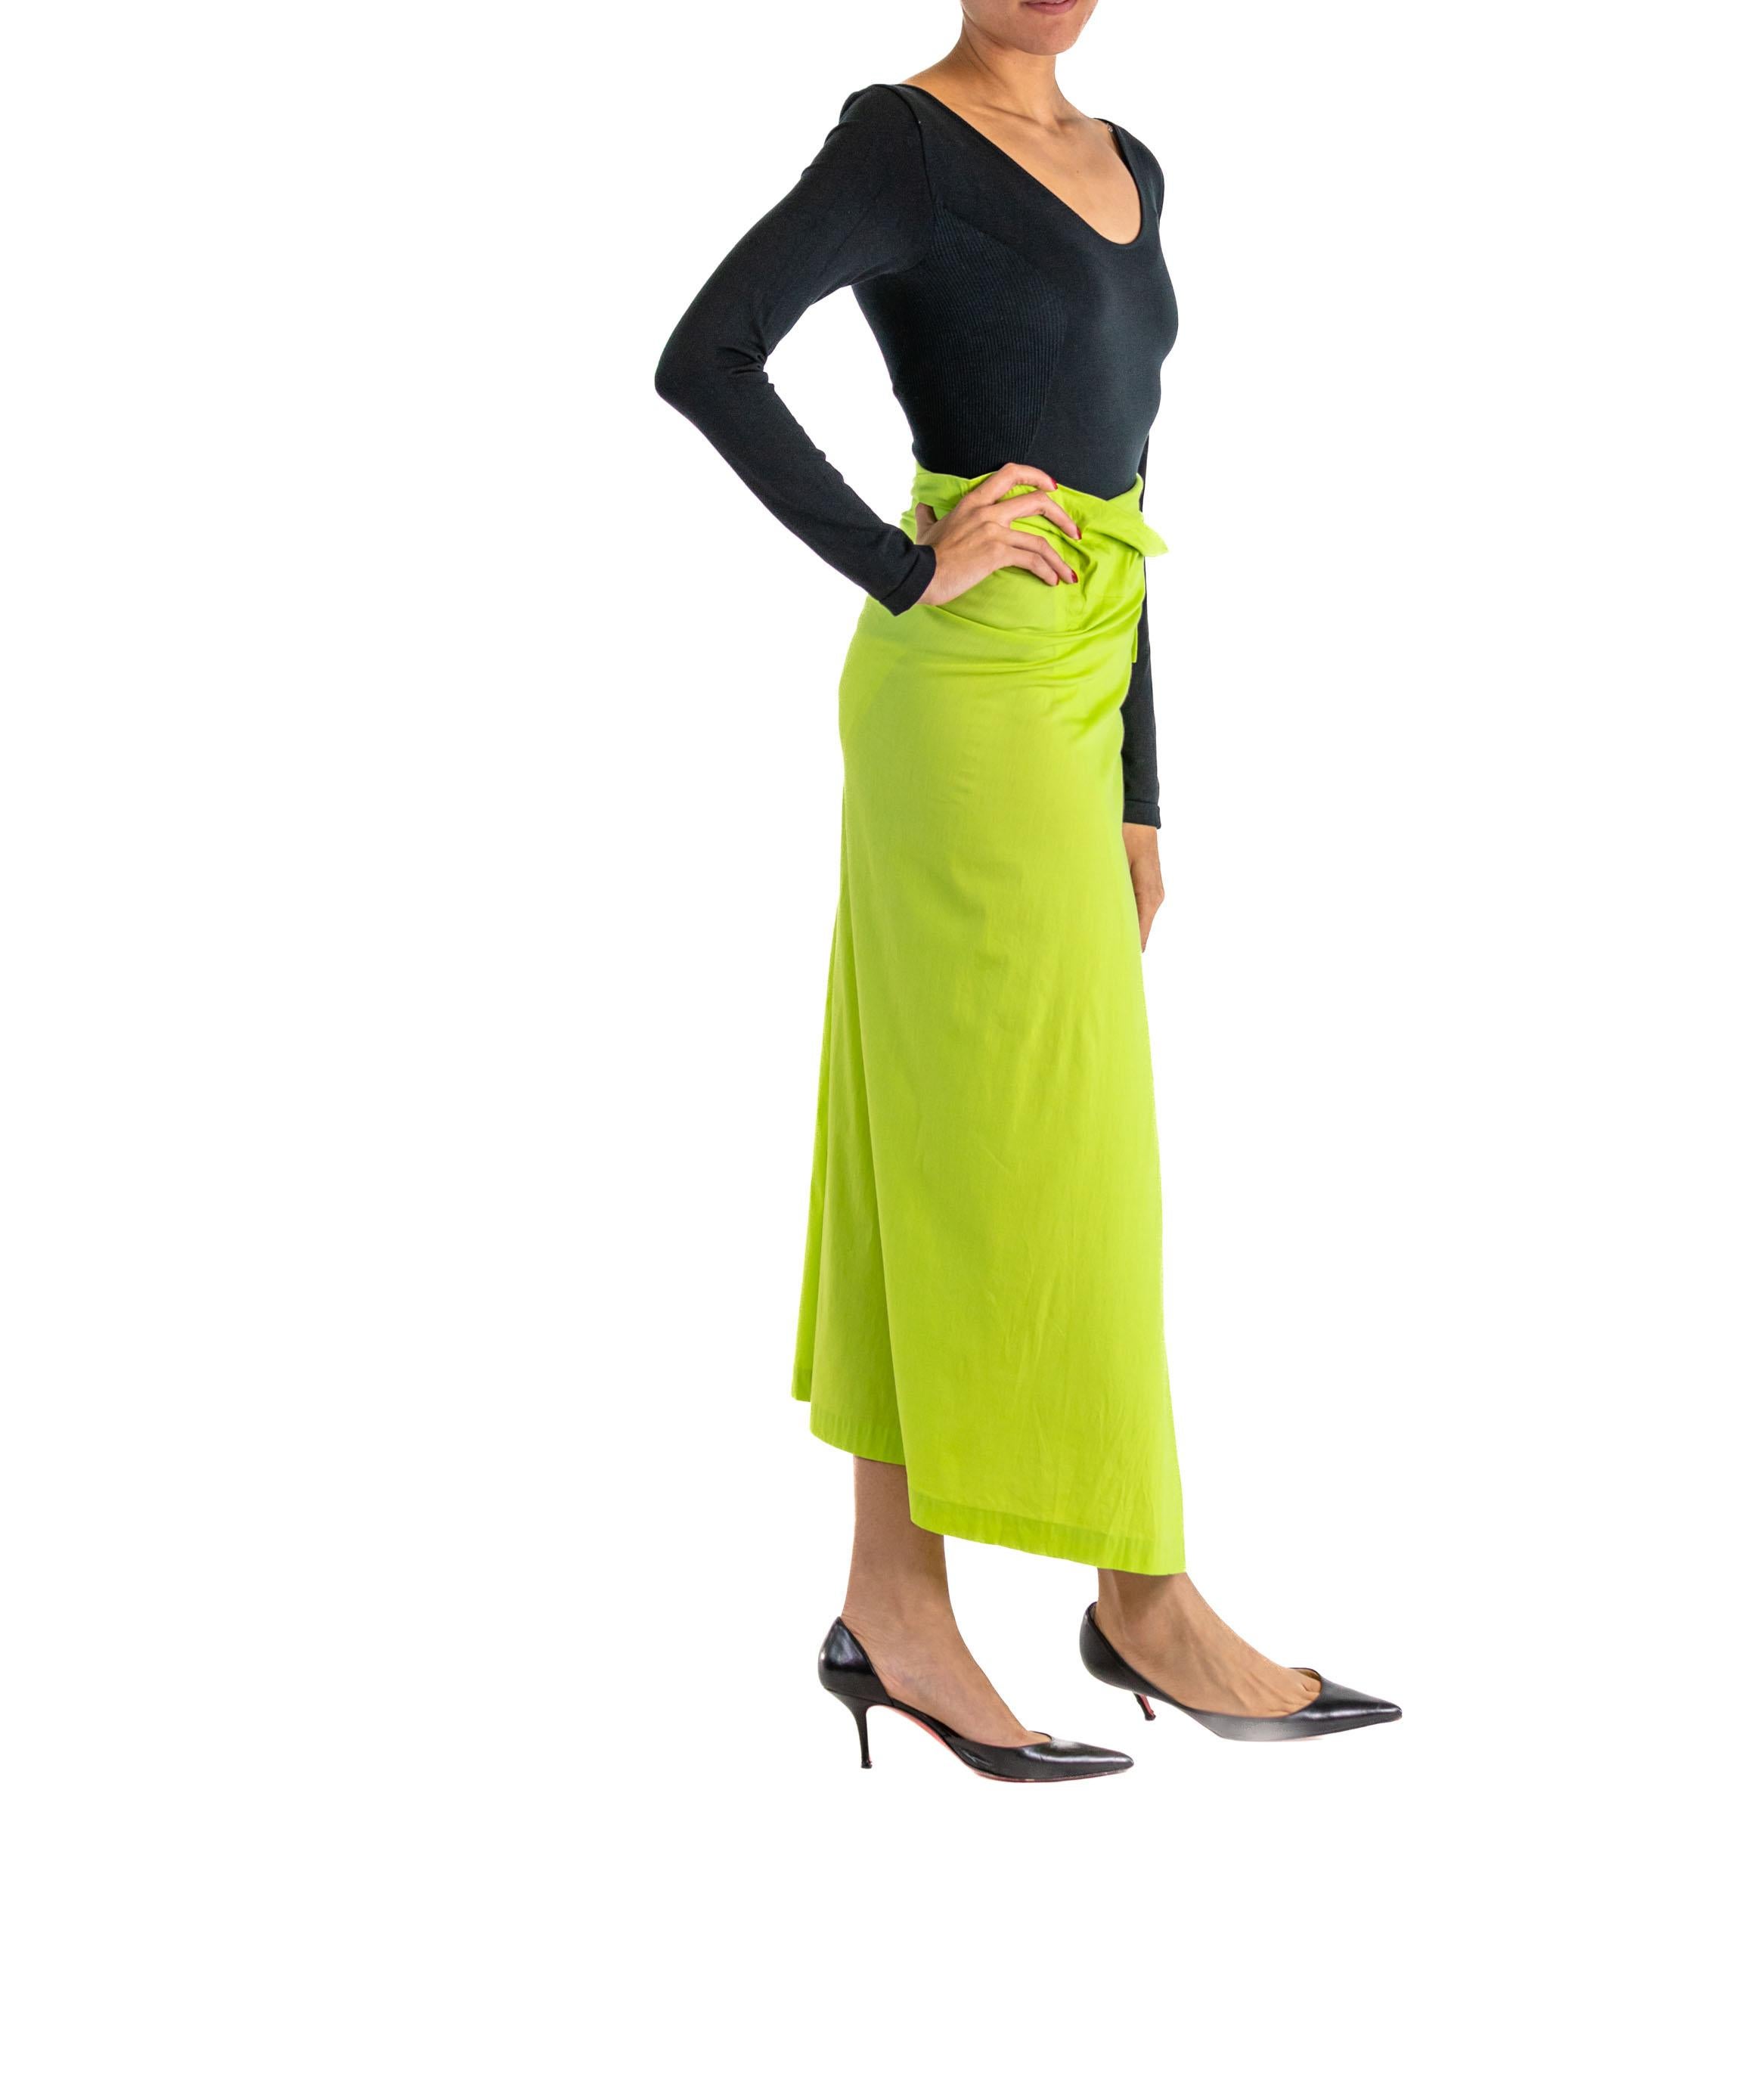 1990S ISSEY MIYAKE Lime Green & Black Rayon Blend Scoop Neck Top Skirt Ensemble For Sale 3